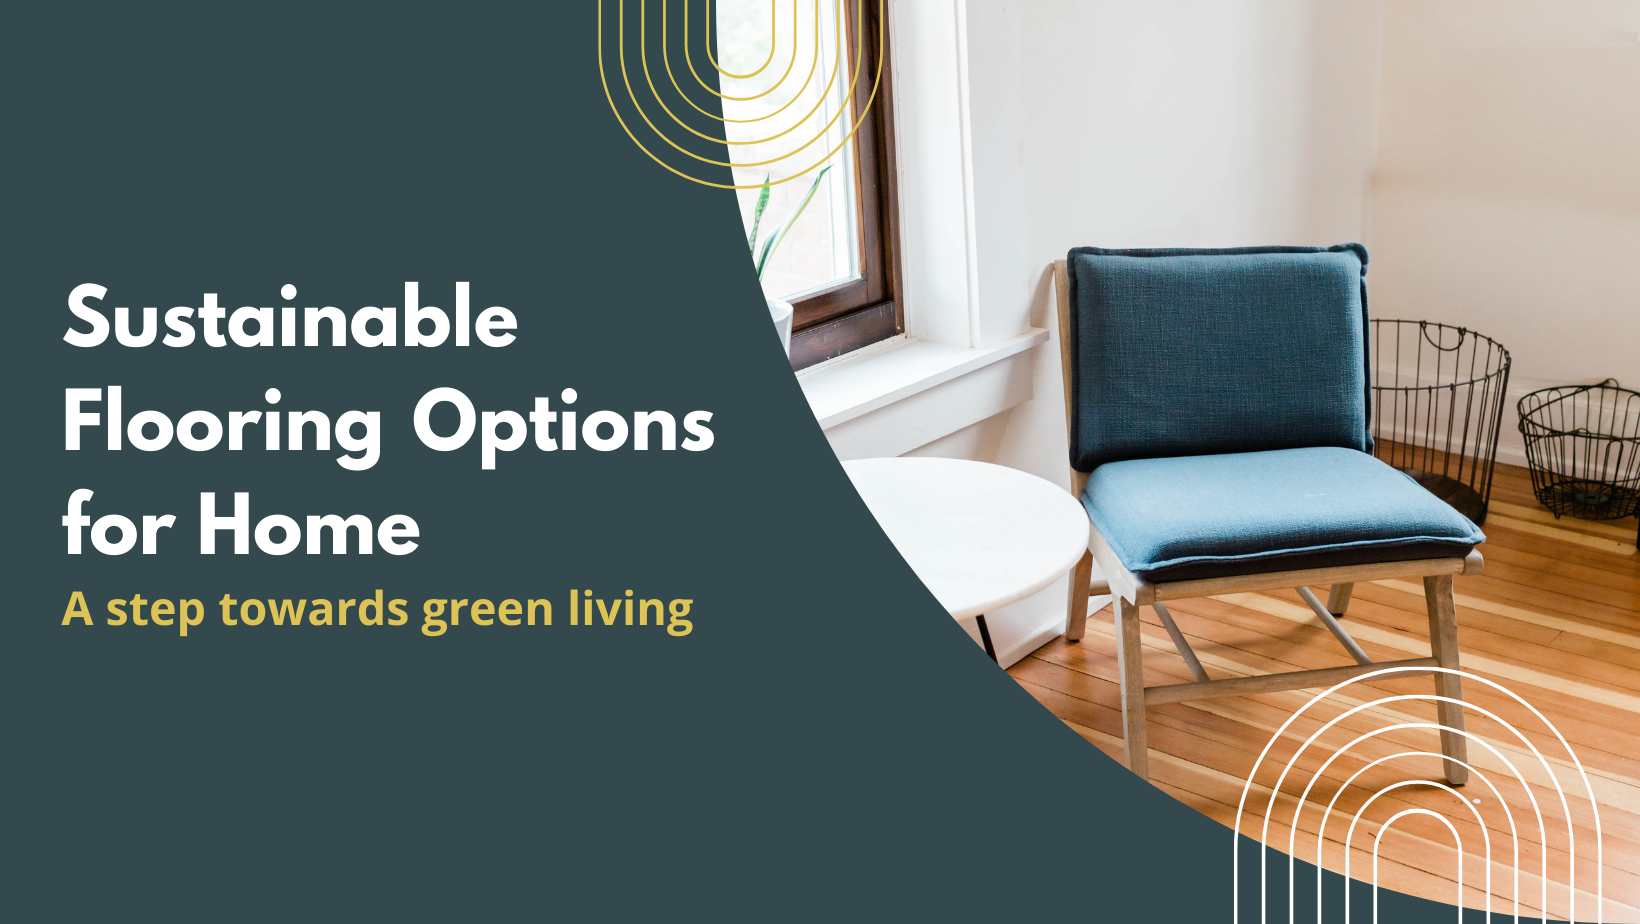 Sustainable flooring options for home: A step towards green living